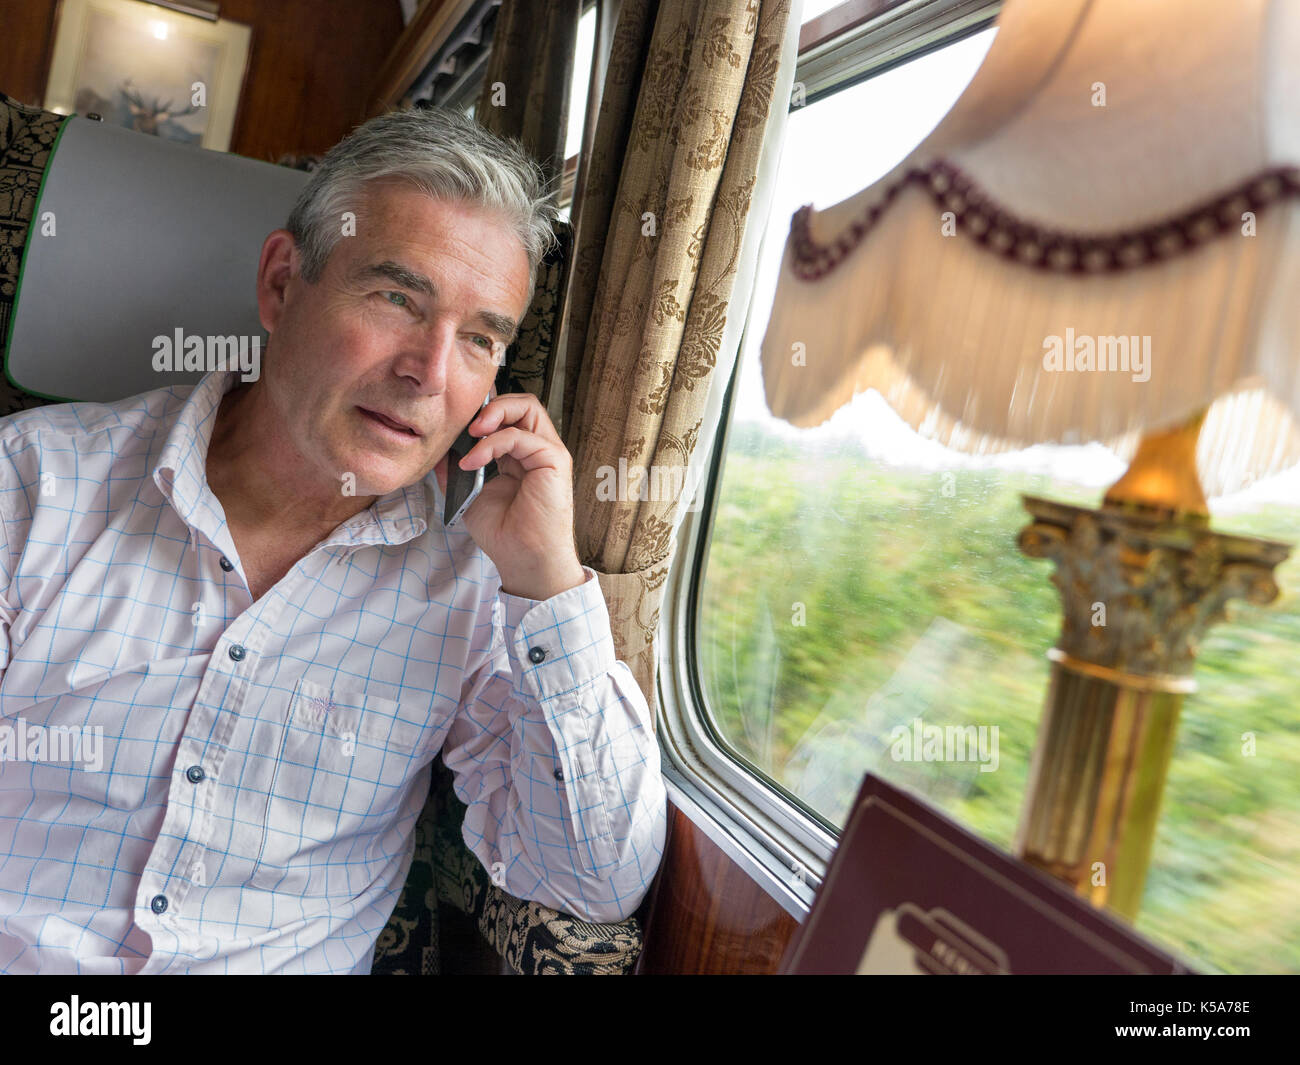 Relaxed mature man in first class restaurant rail car talking on his iPhone 6, enjoying a train trip in a luxury vintage Pullman railway carriage Stock Photo